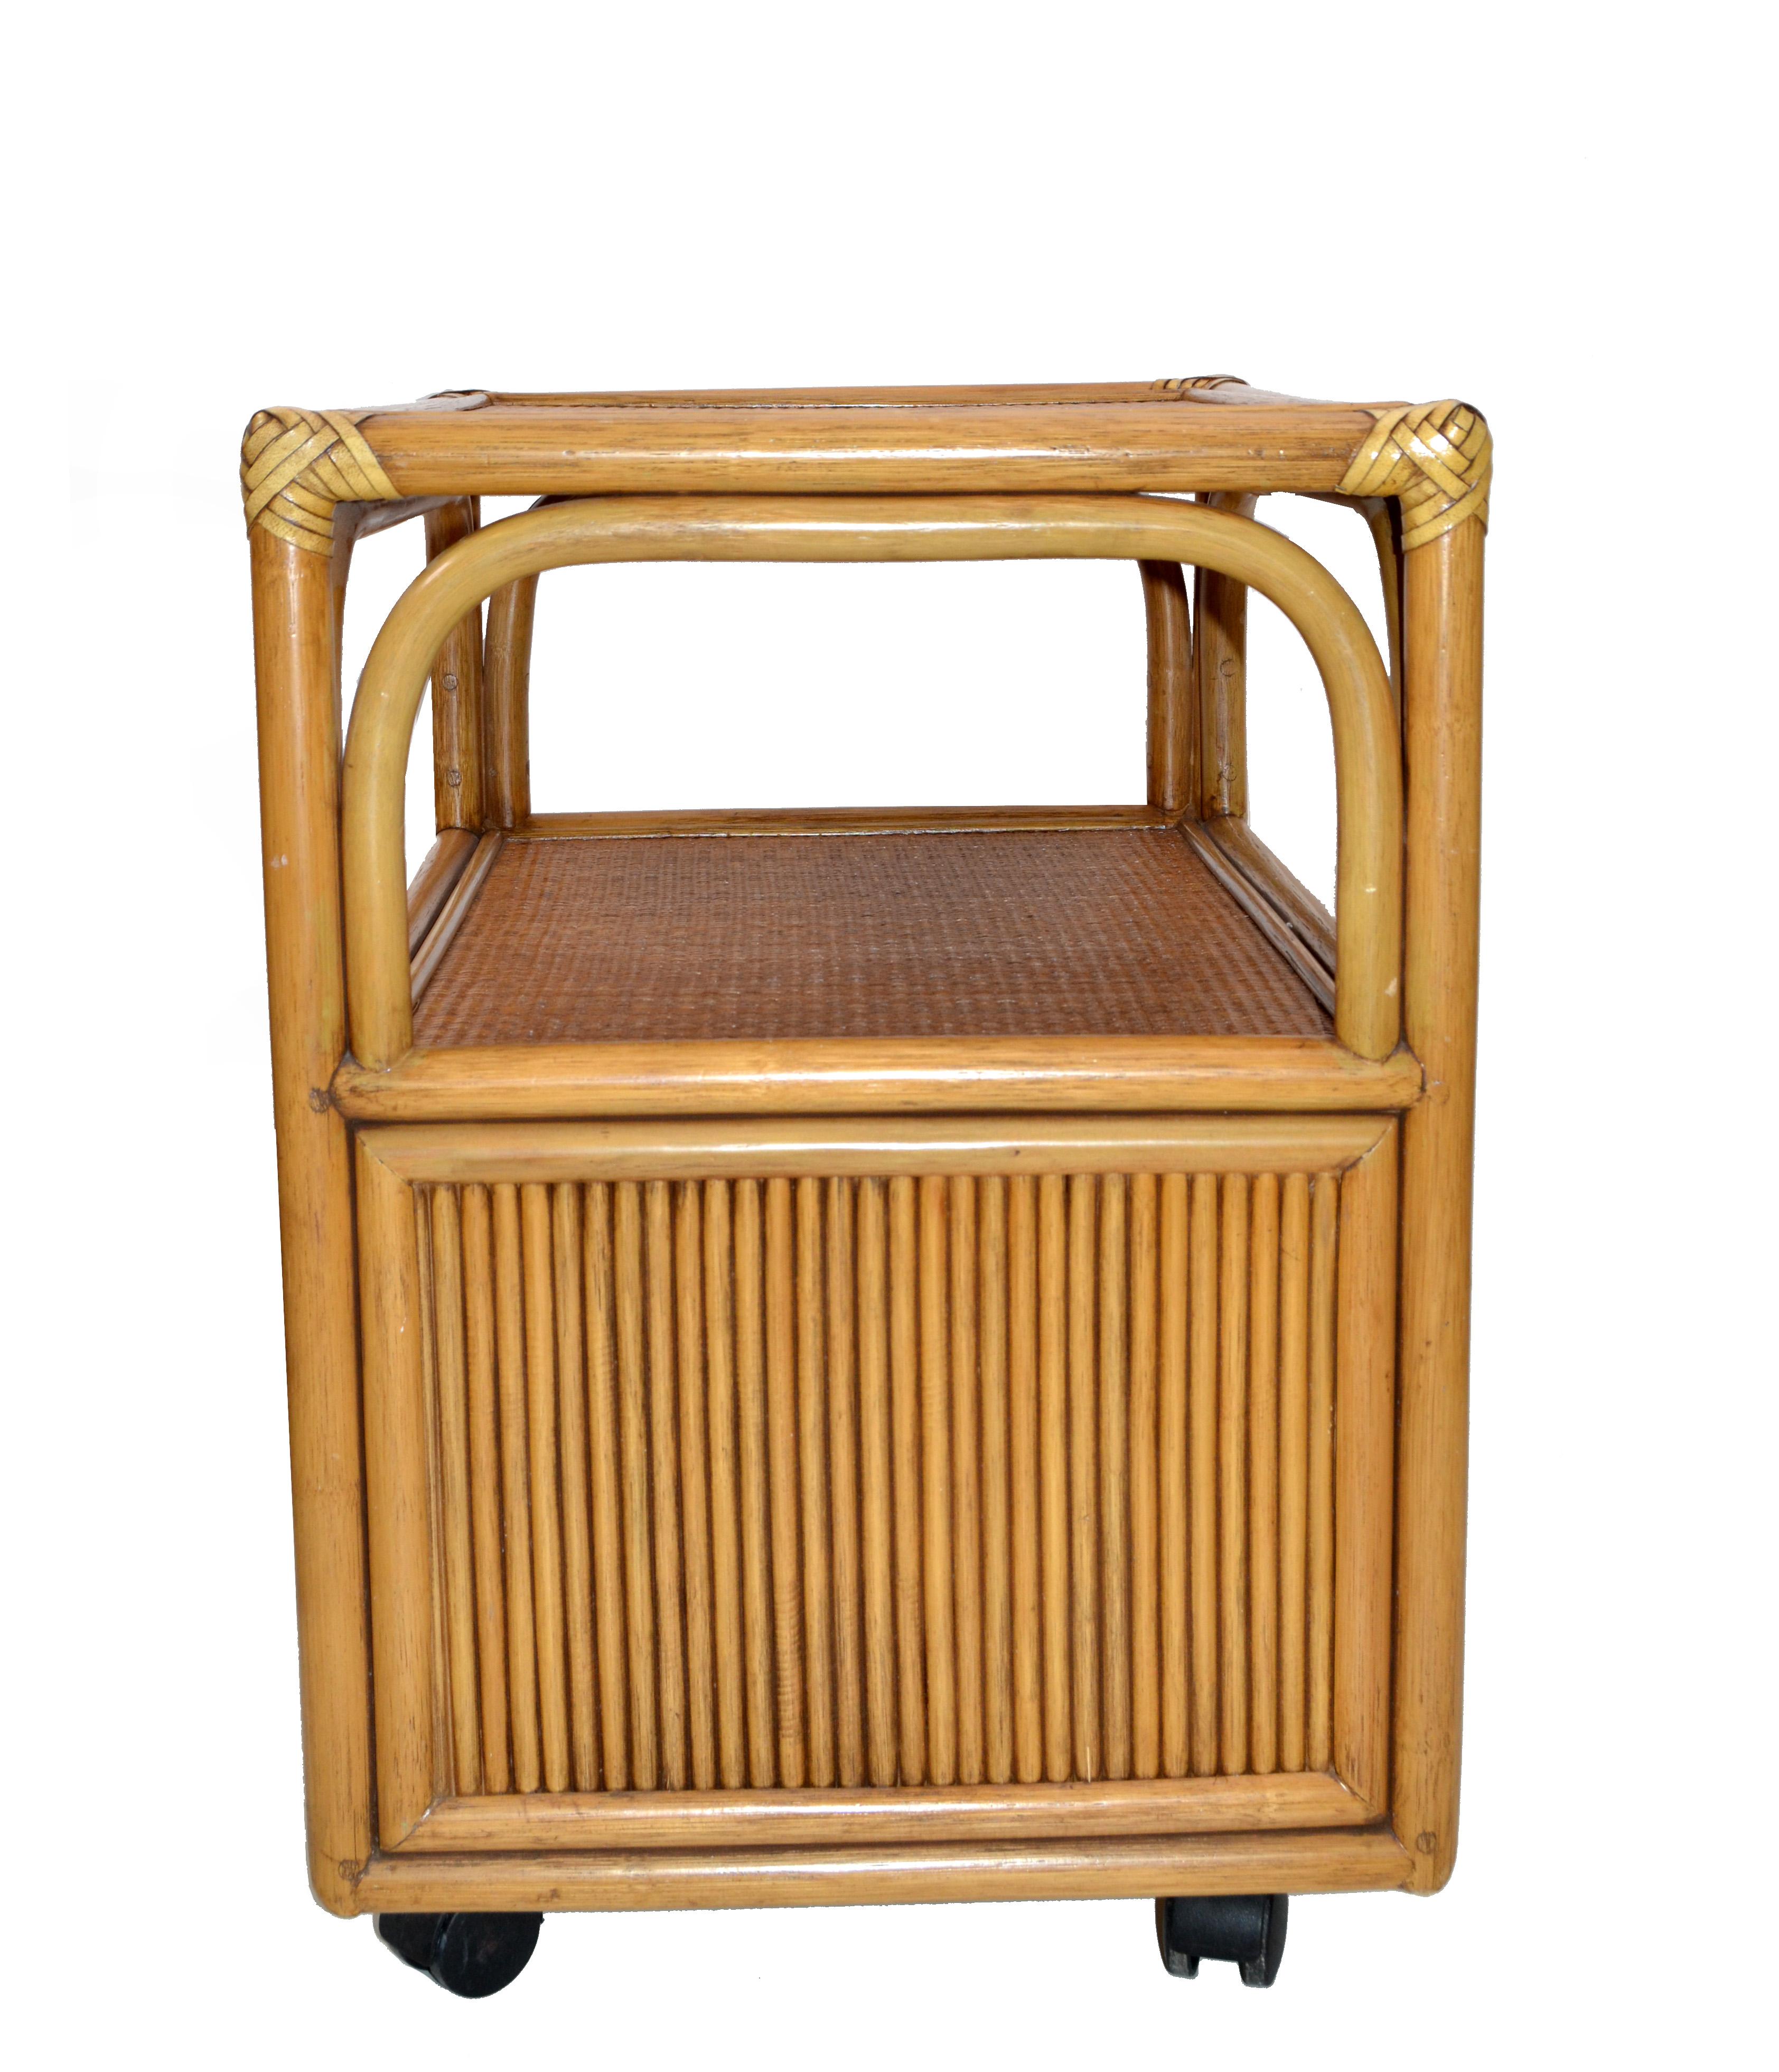 Hand-Crafted 70s Mid-Century Modern Bamboo Handwoven Leather Corners Cane Top Cart Side Table For Sale